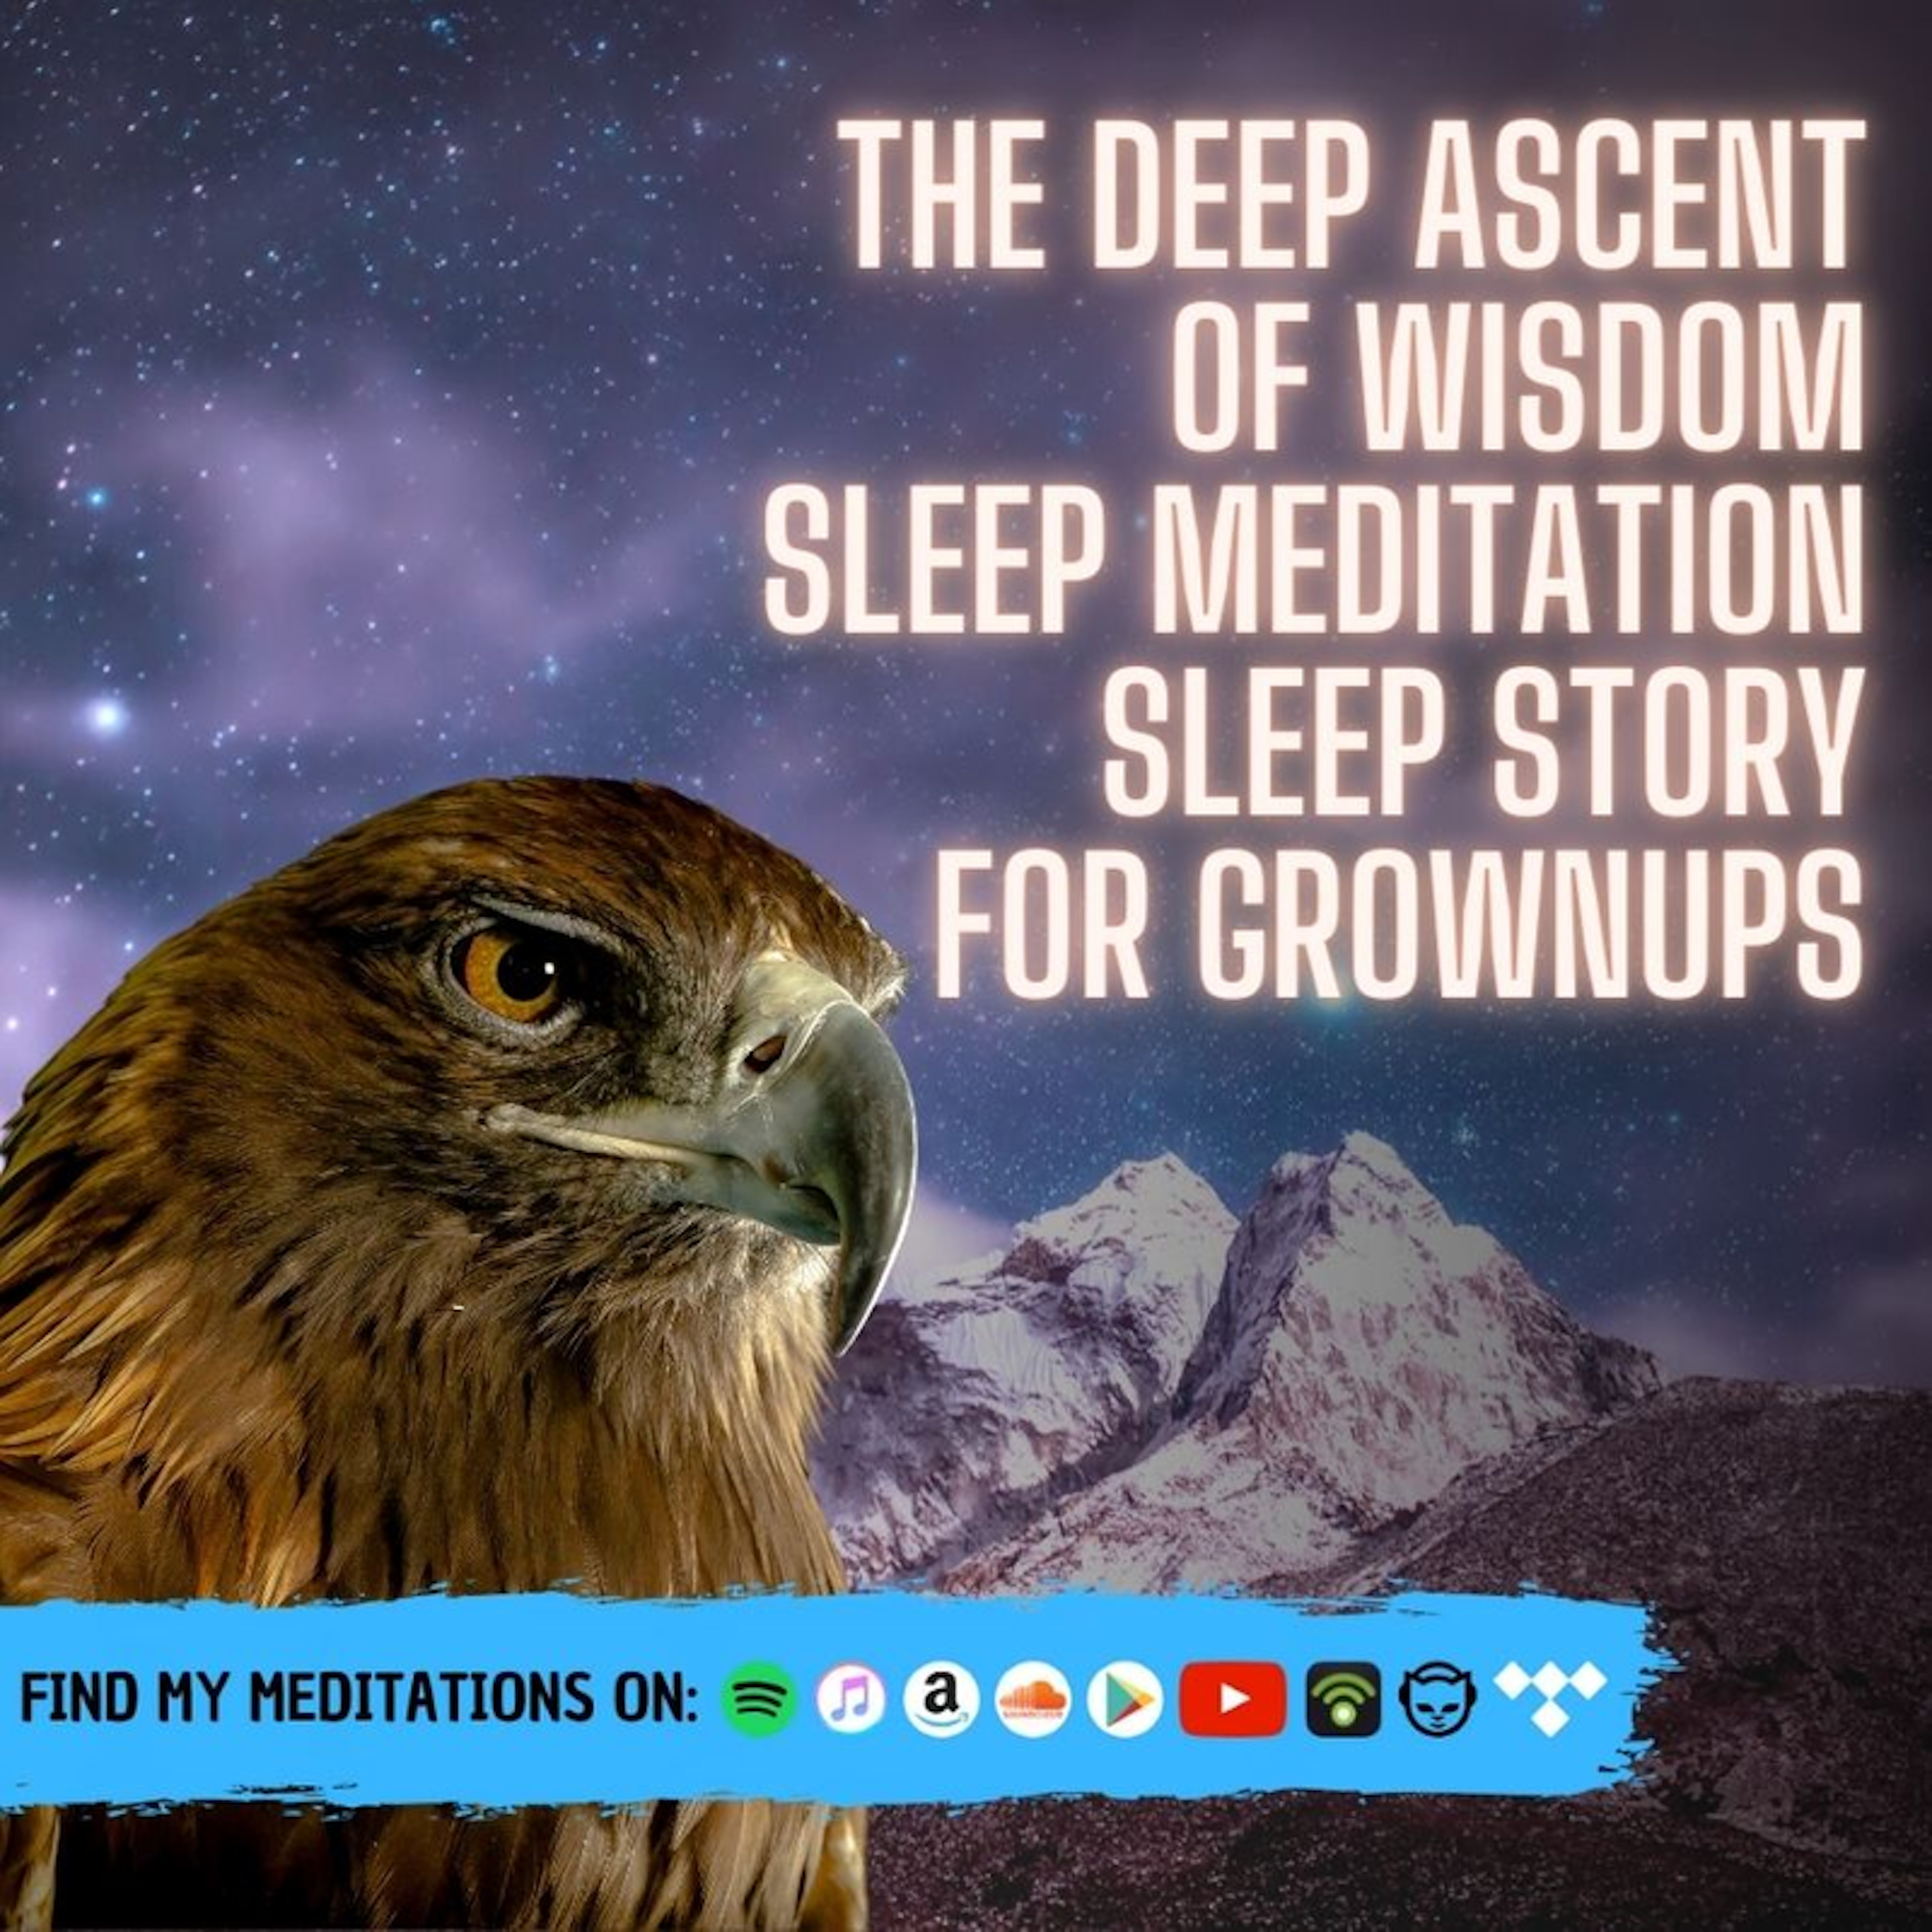 The Deep Ascent of Wisdom